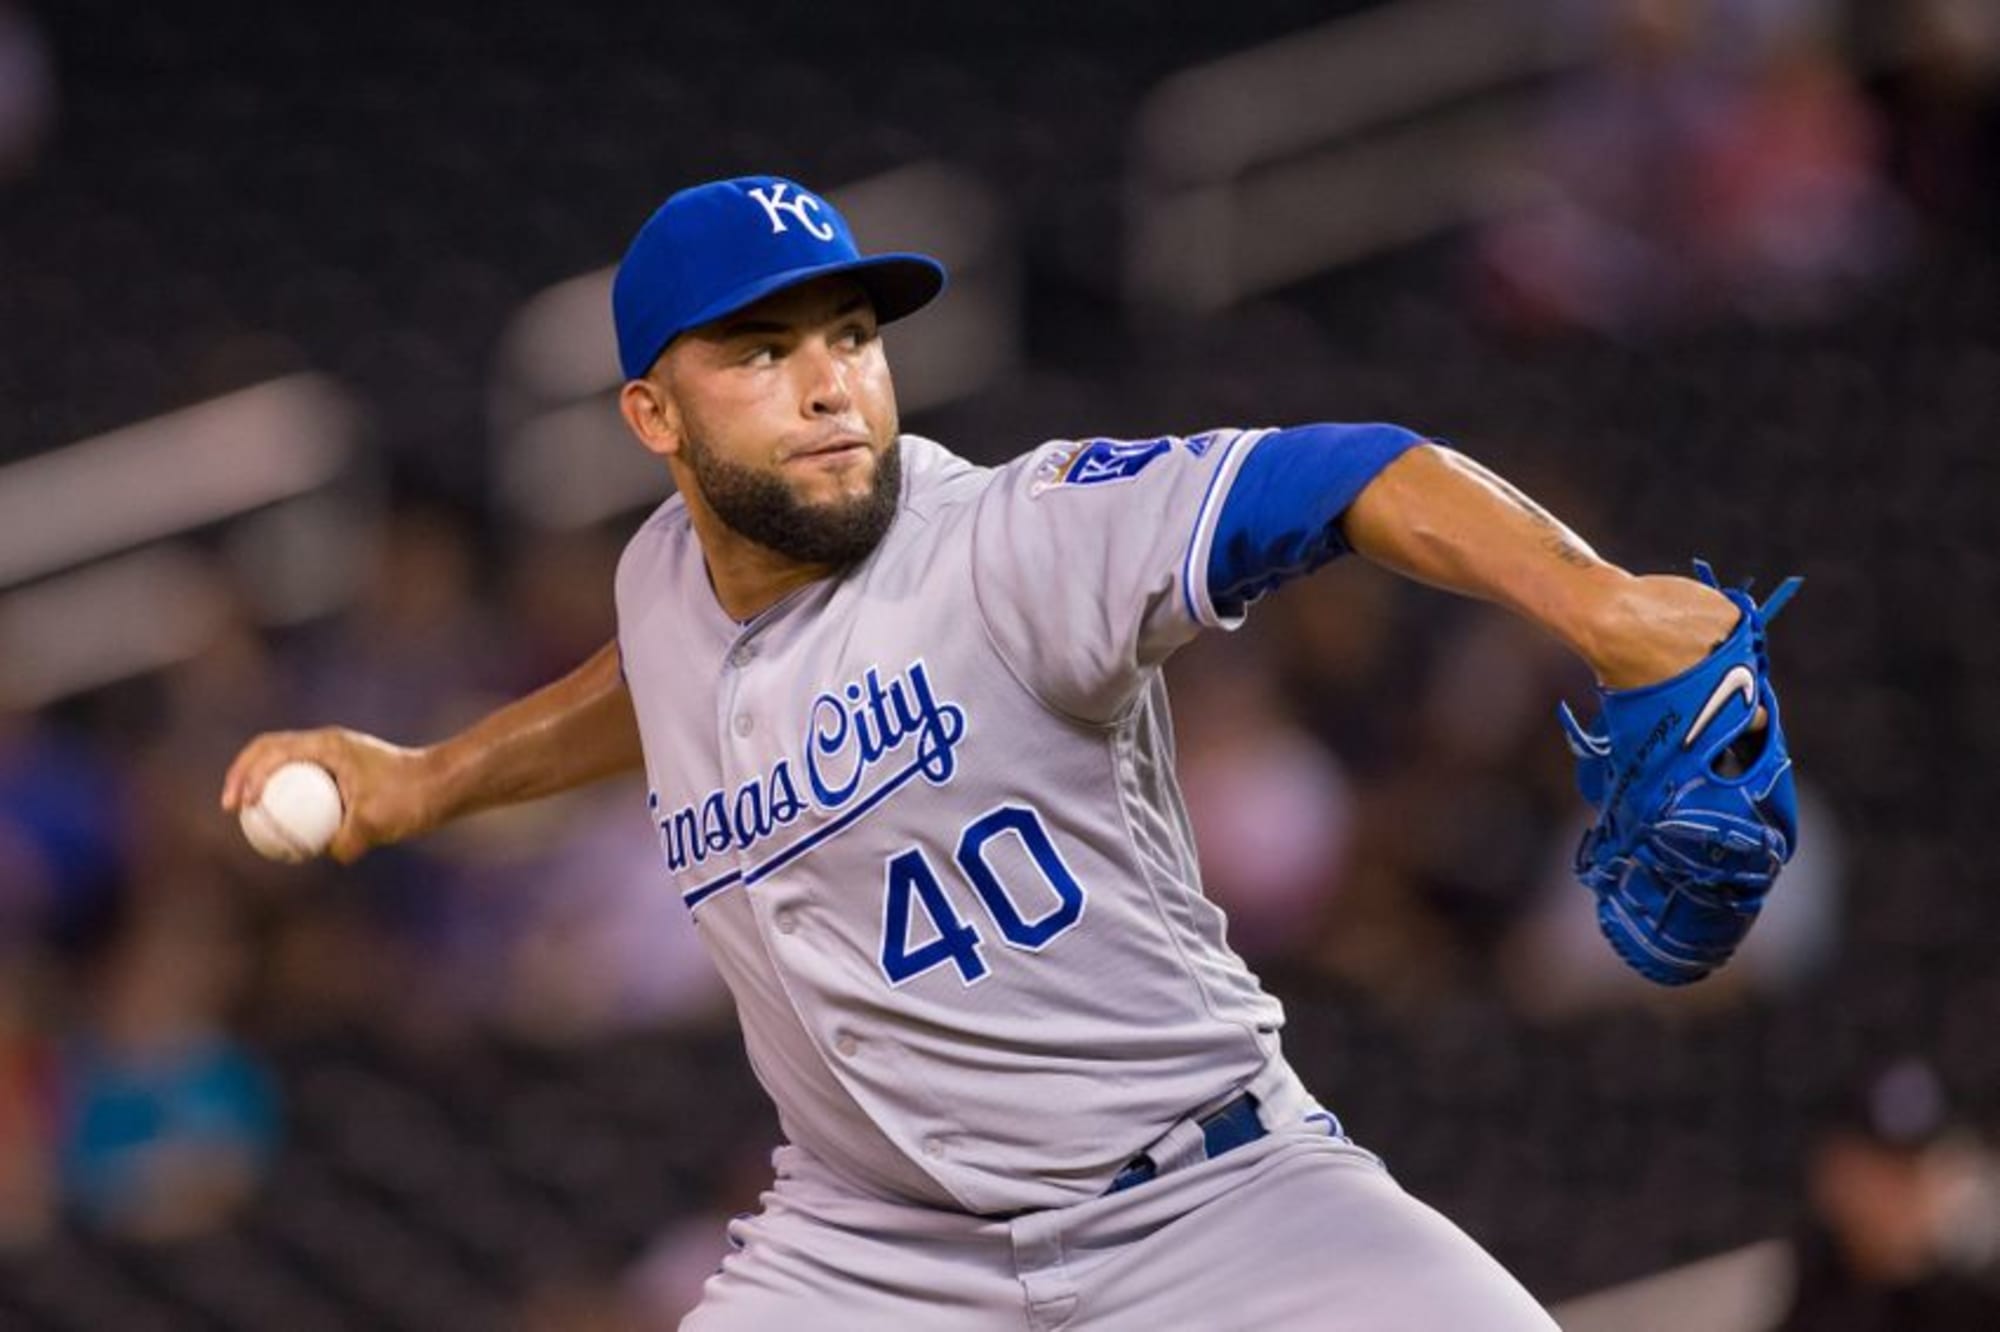 Can Royals' bullpen be even better in 2015?